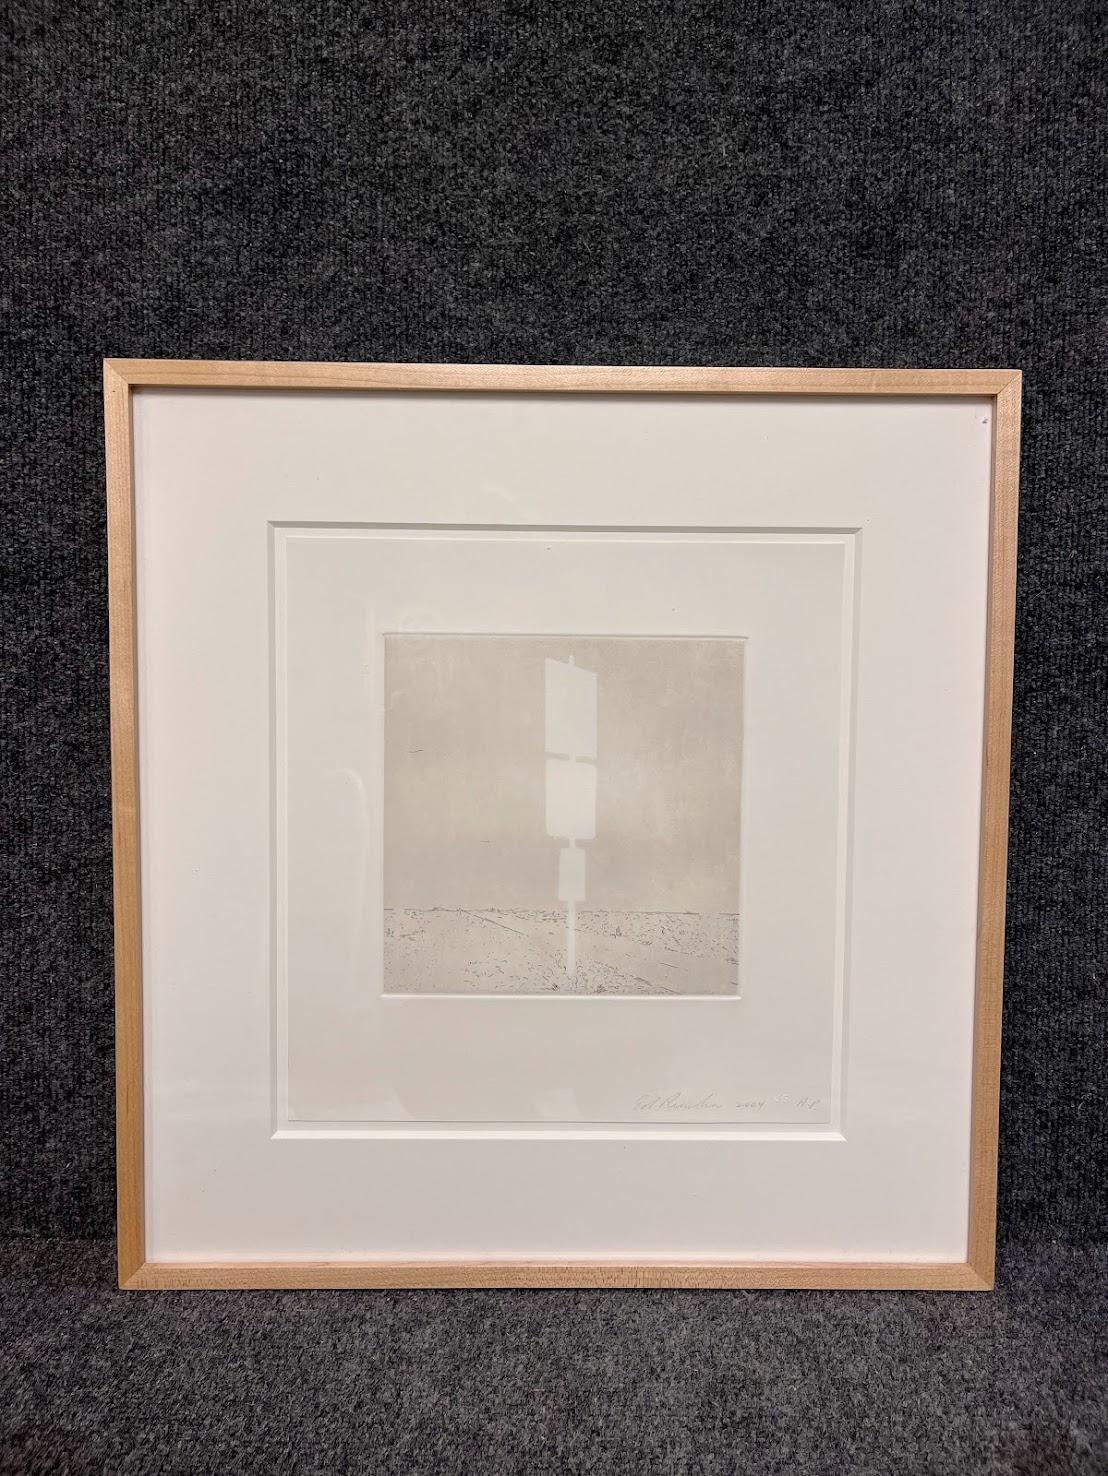 Ed Ruscha 'Blank Signs' Signed Etching and Aquatint Four Framed Prints 2004 For Sale 8